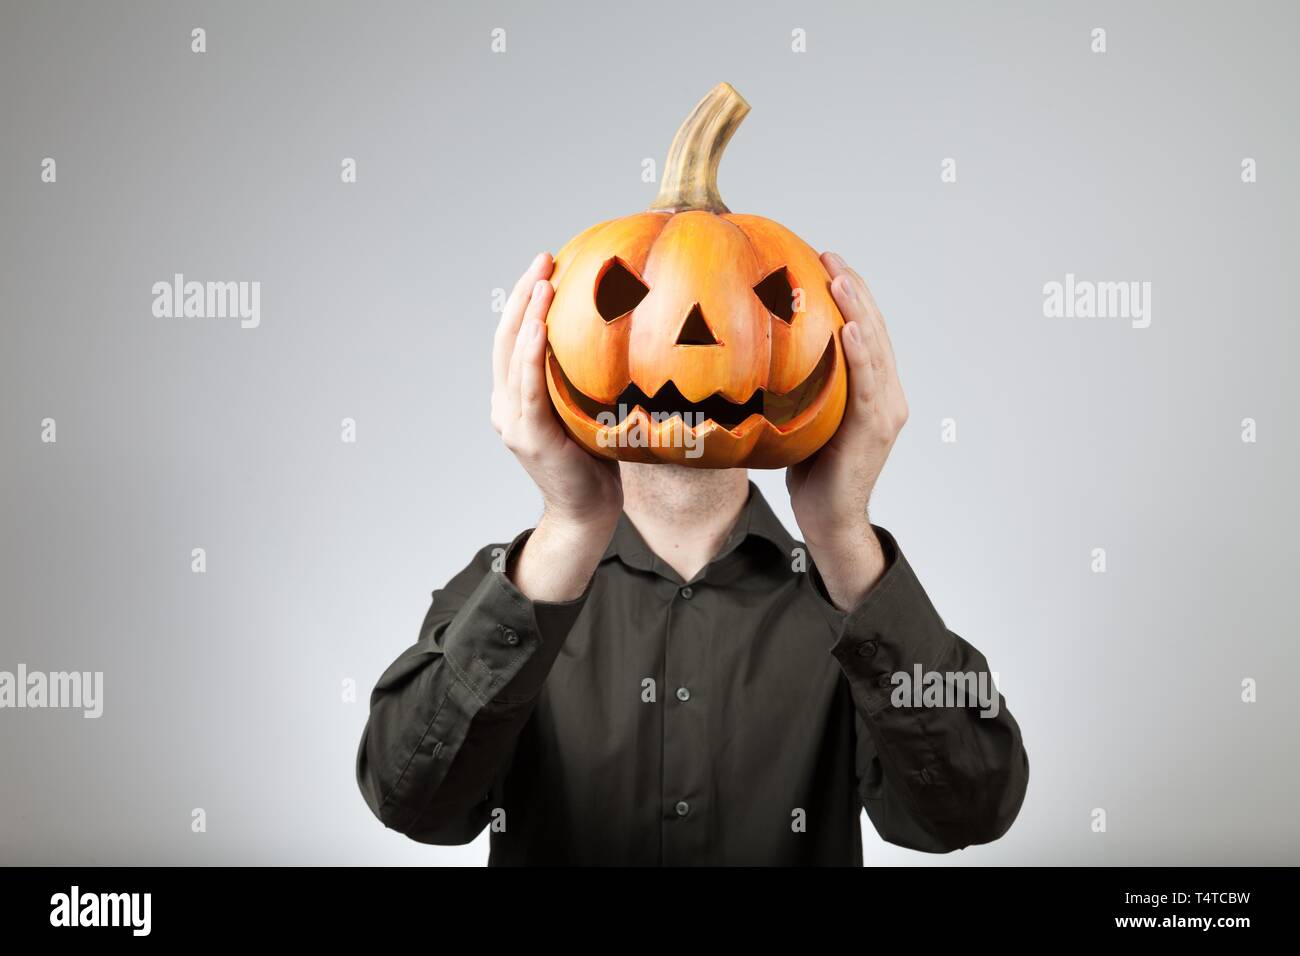 Man holding a clay pumpkin in front of his head Stock Photo